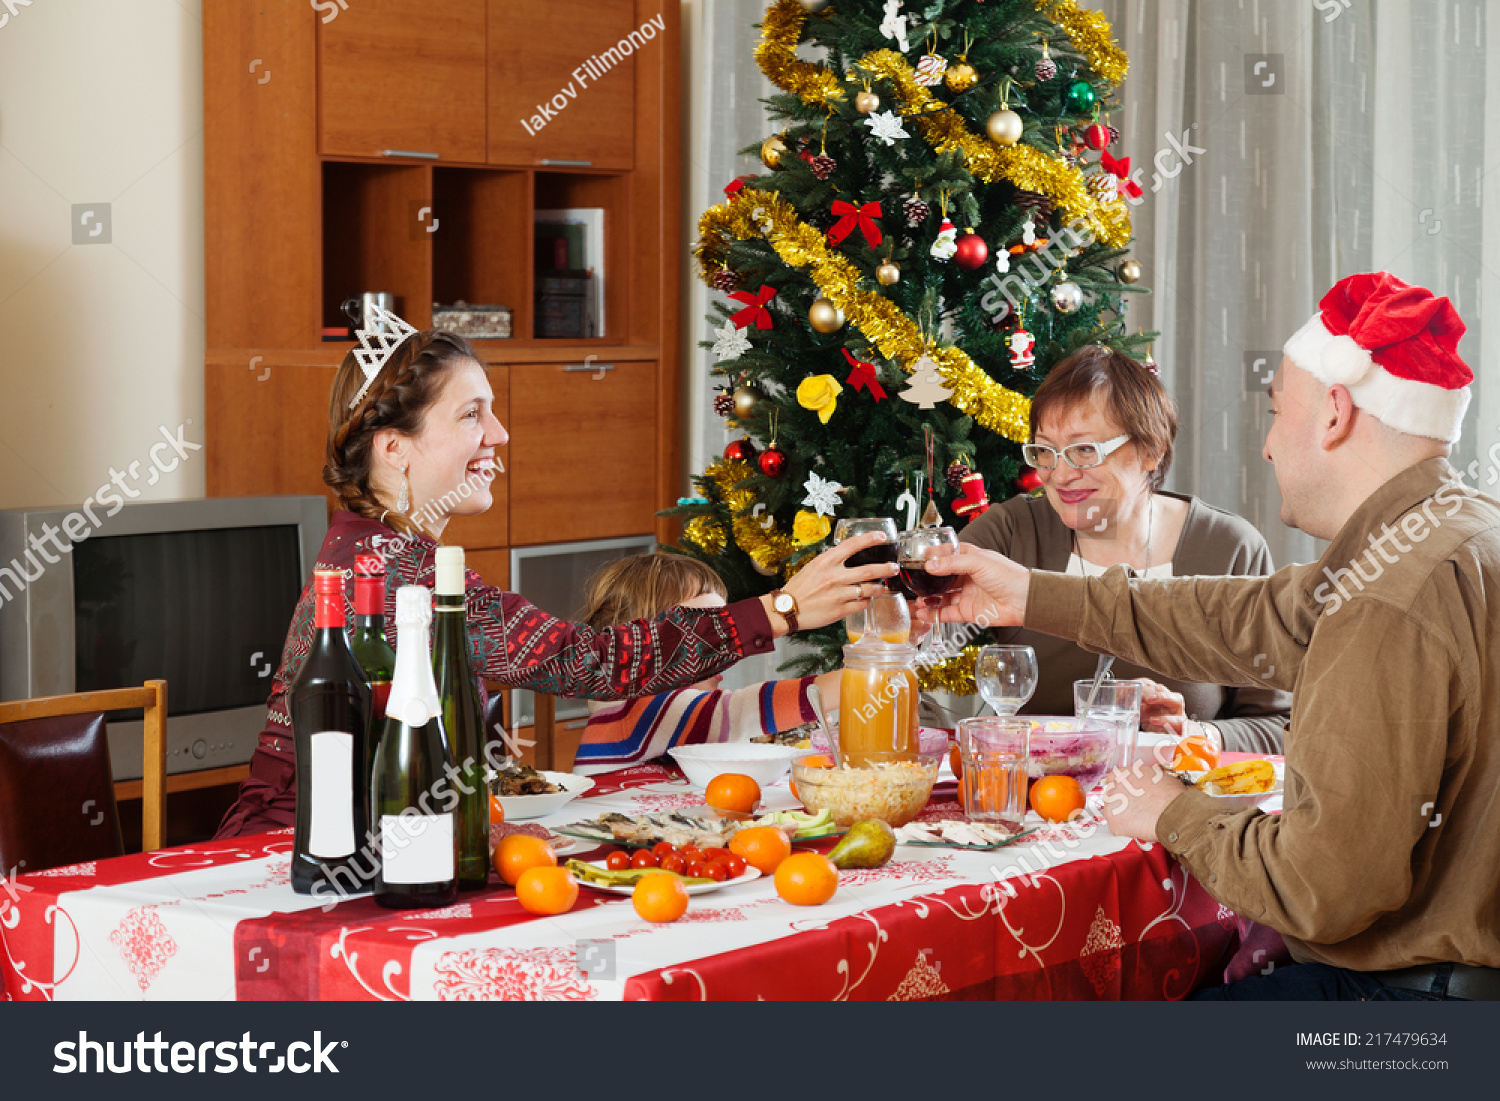 Happy family of three generations celebrating New Year over celebratory table at home   #217479634